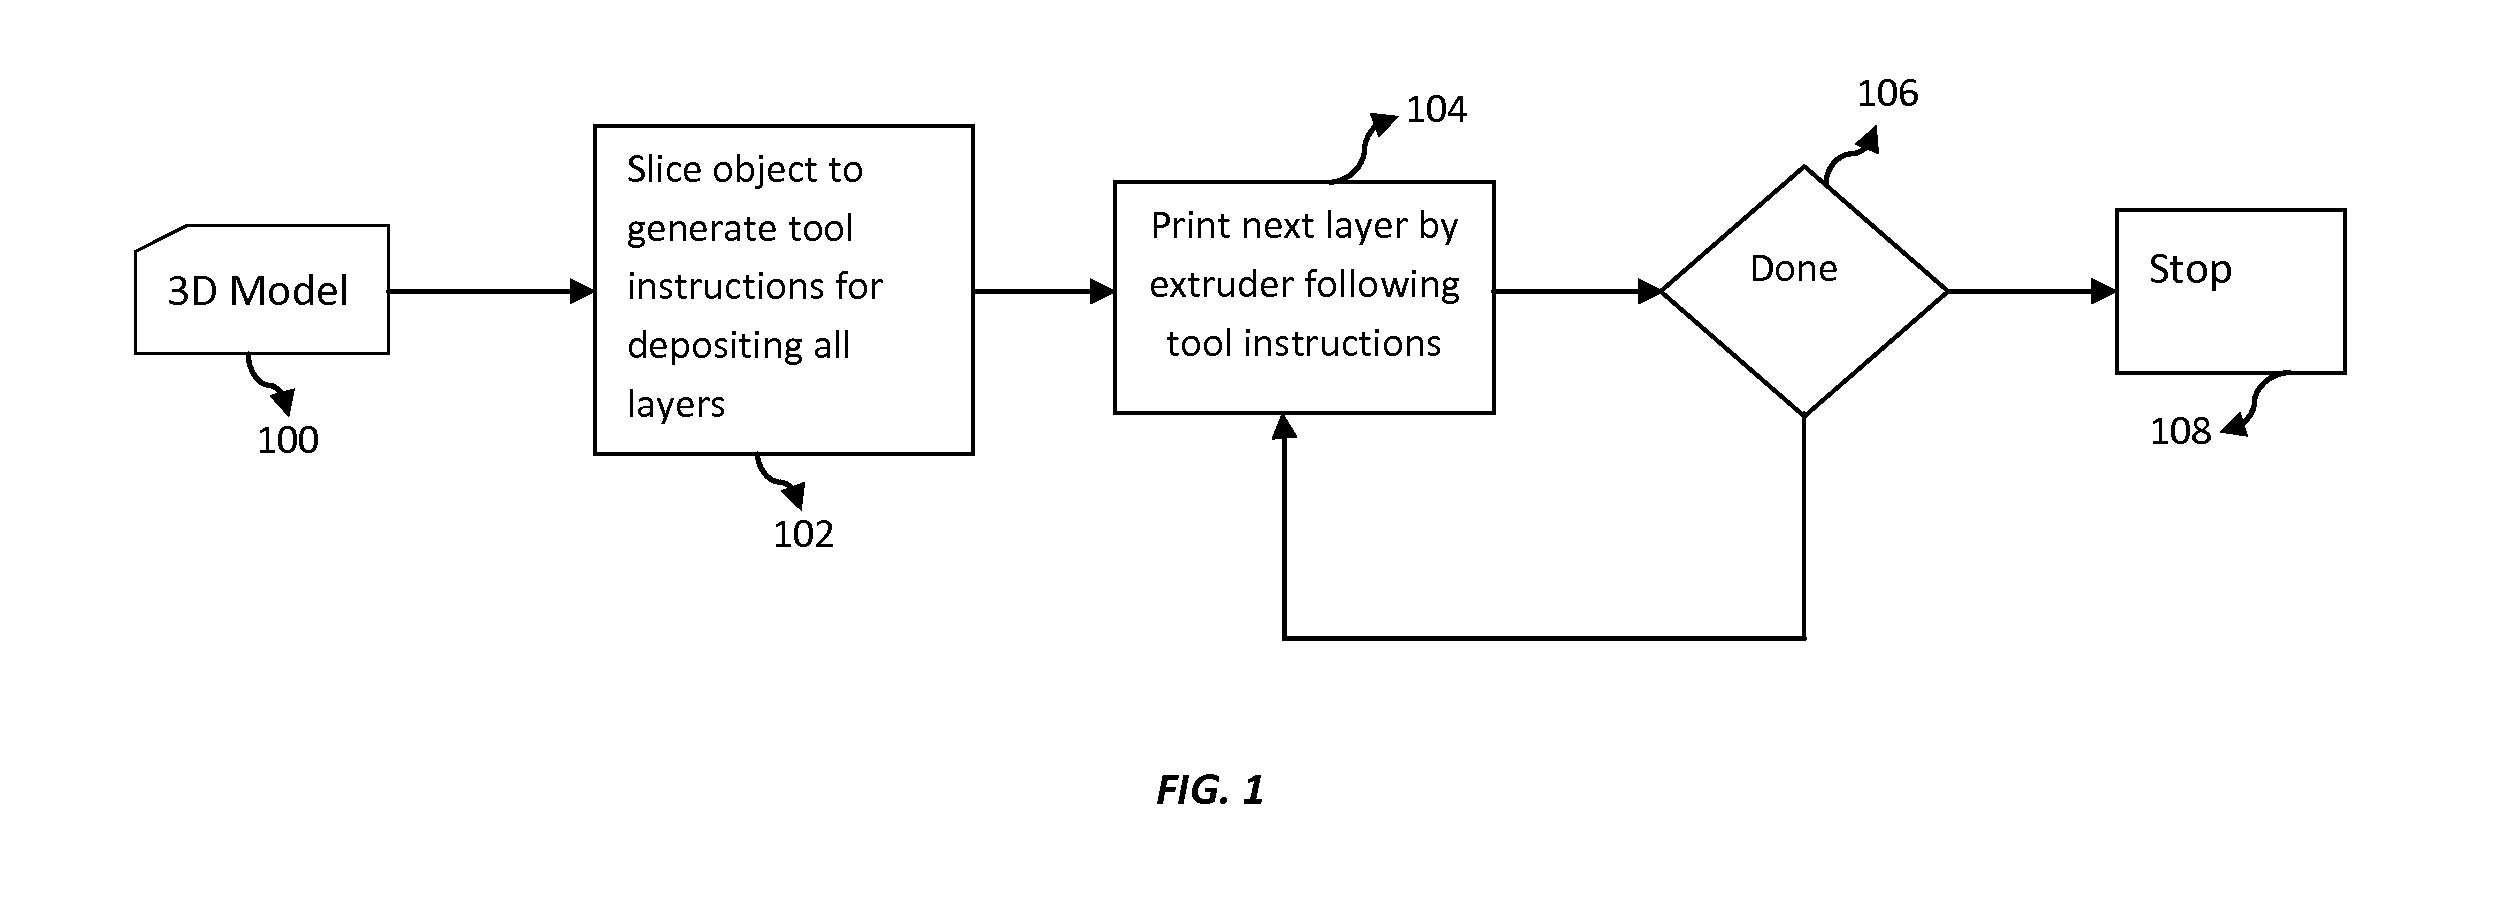 Method to monitor additive manufacturing process for detection and in-situ correction of defects